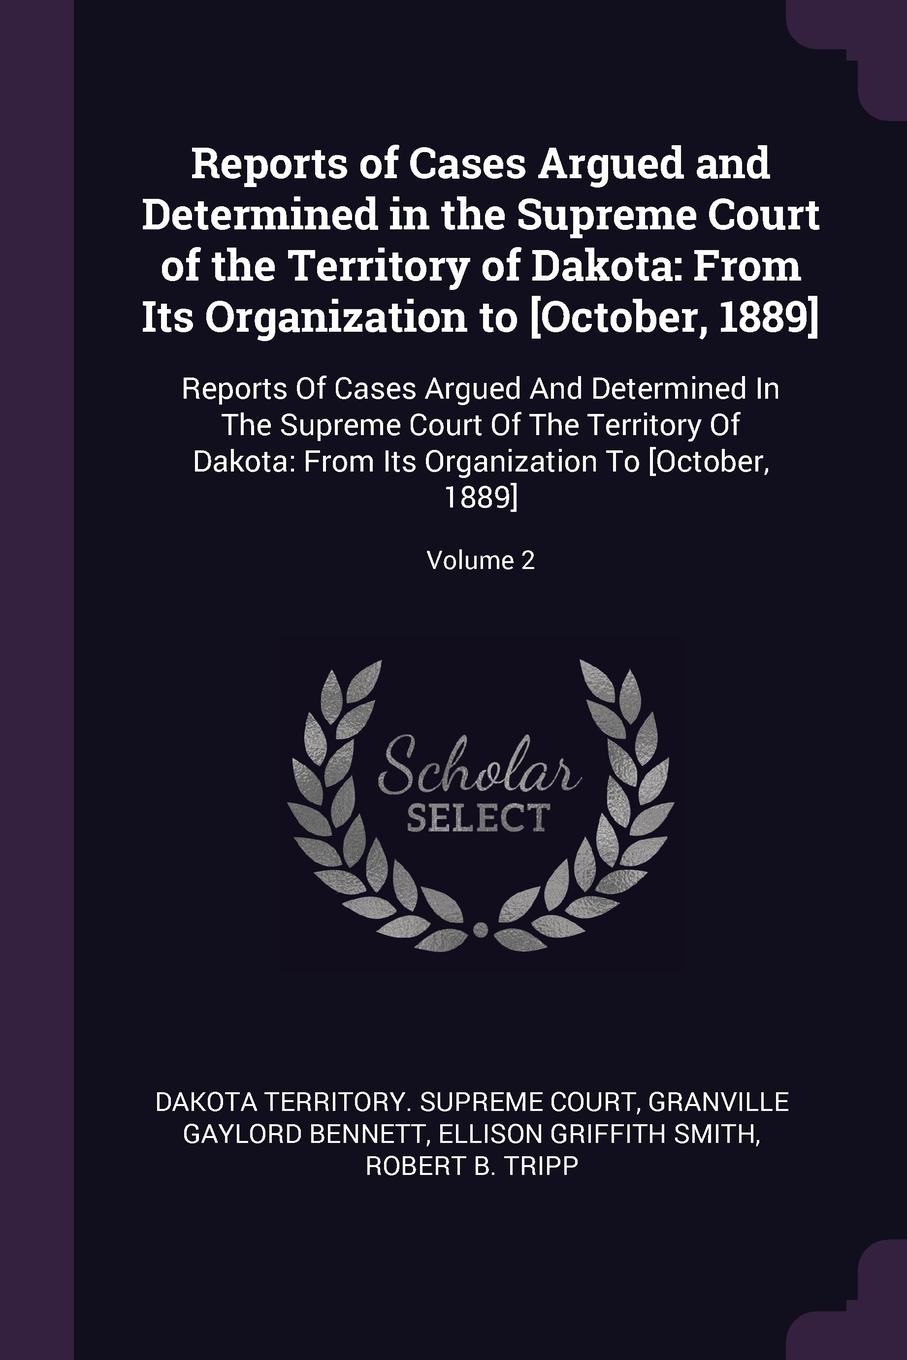 Reports of Cases Argued and Determined in the Supreme Court of the Territory of Dakota. From Its Organization to .October, 1889.: Reports Of Cases Argued And Determined In The Supreme Court Of The Territory Of Dakota: From Its Organization To .Oct...